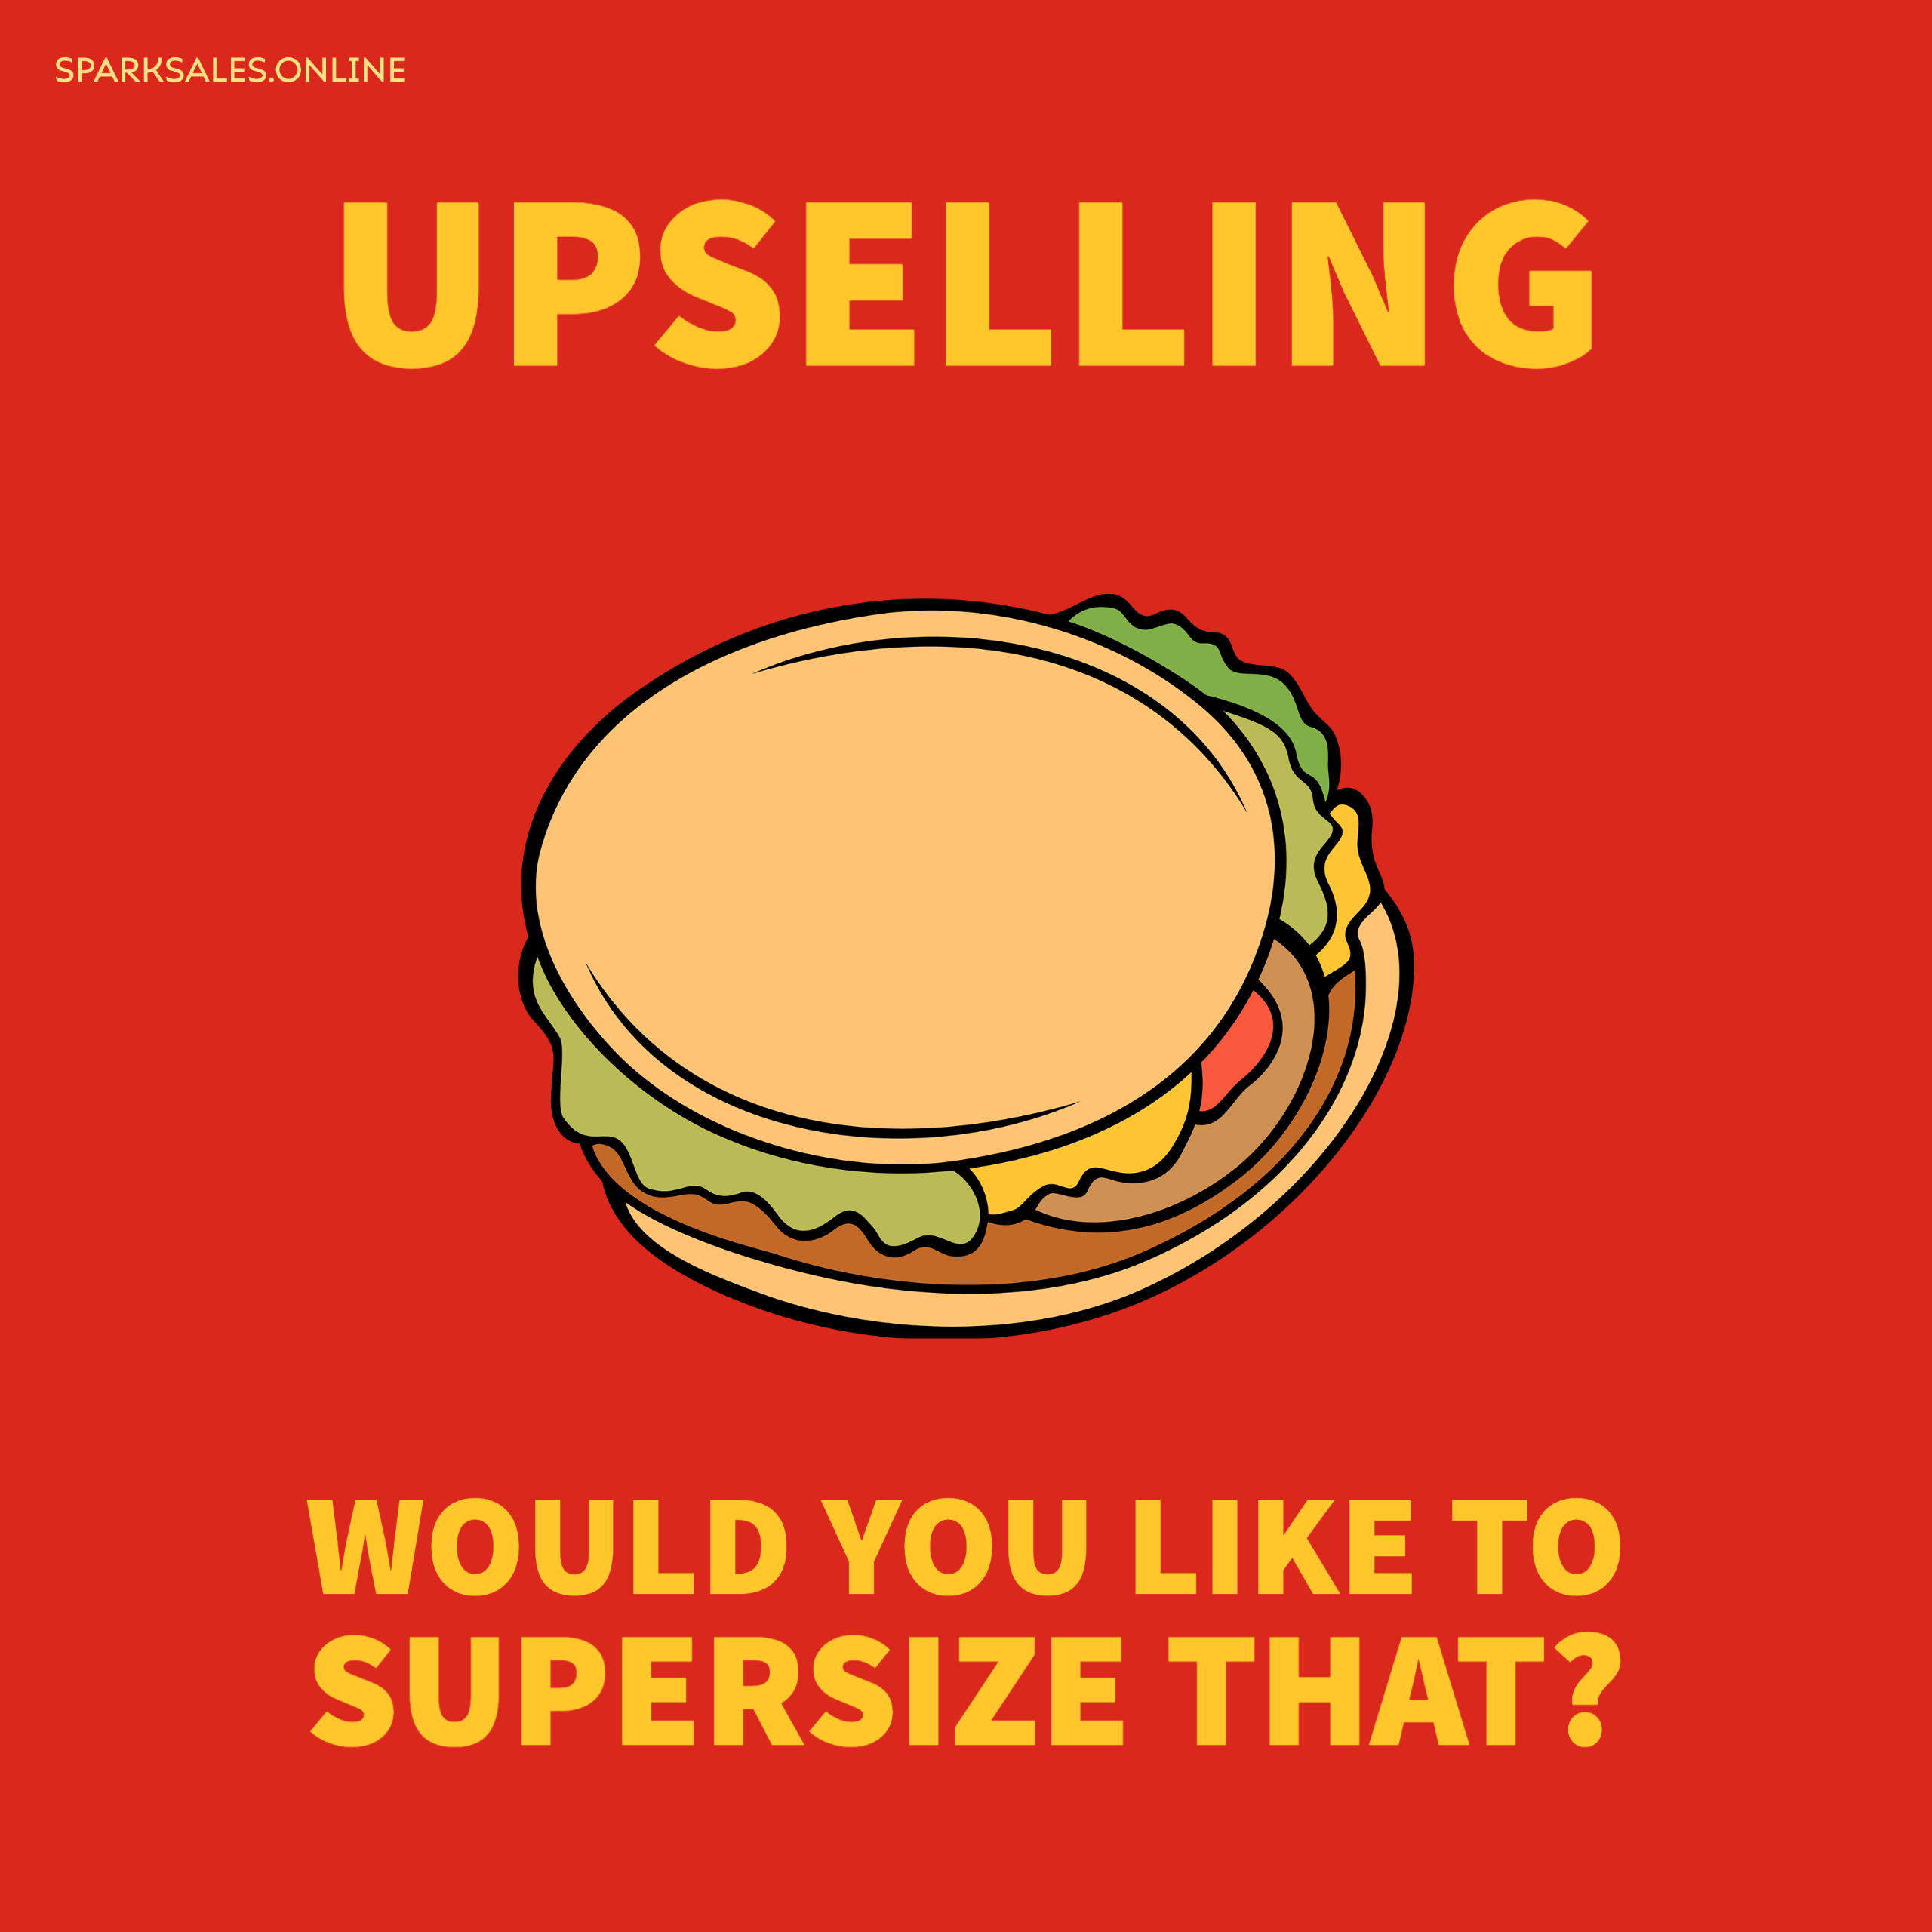 An example of upselling